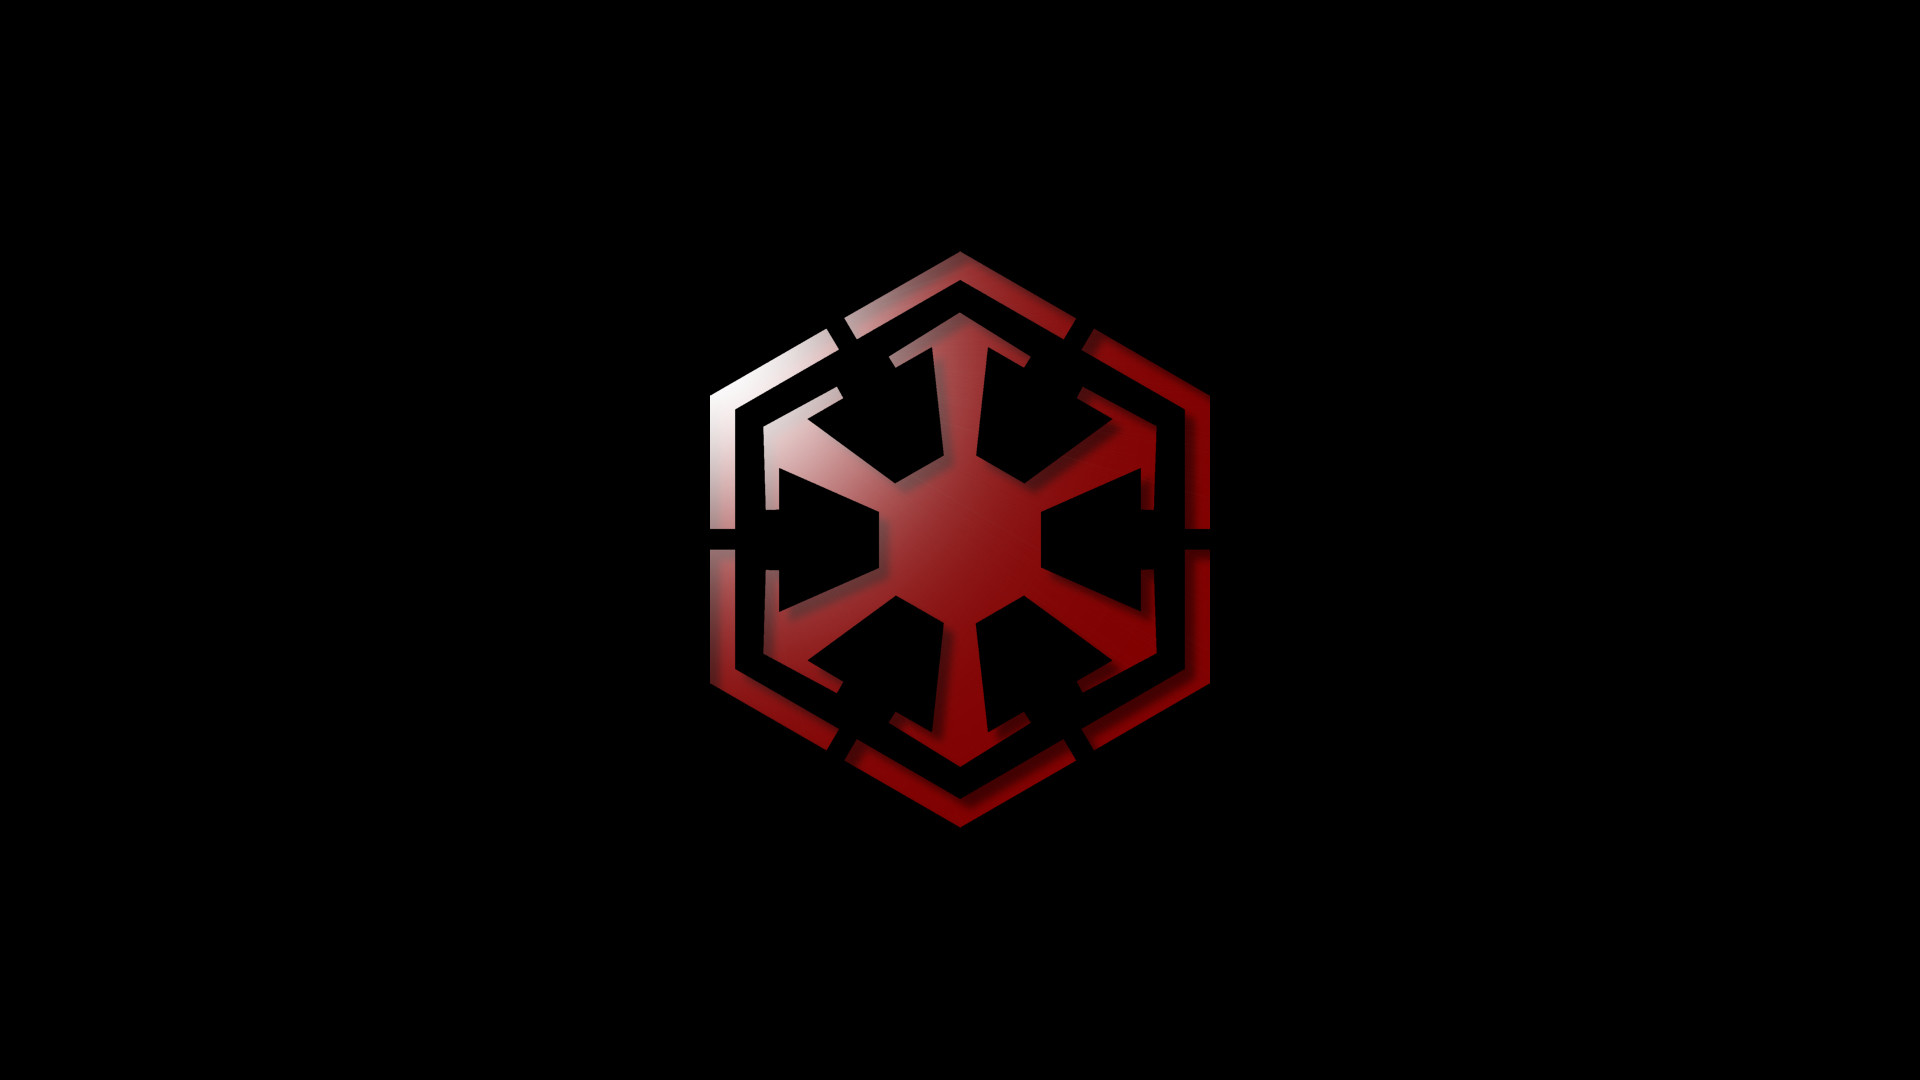 1920x1080 The Simple SWTOR Sith Wallpaper by DistantWanderer 